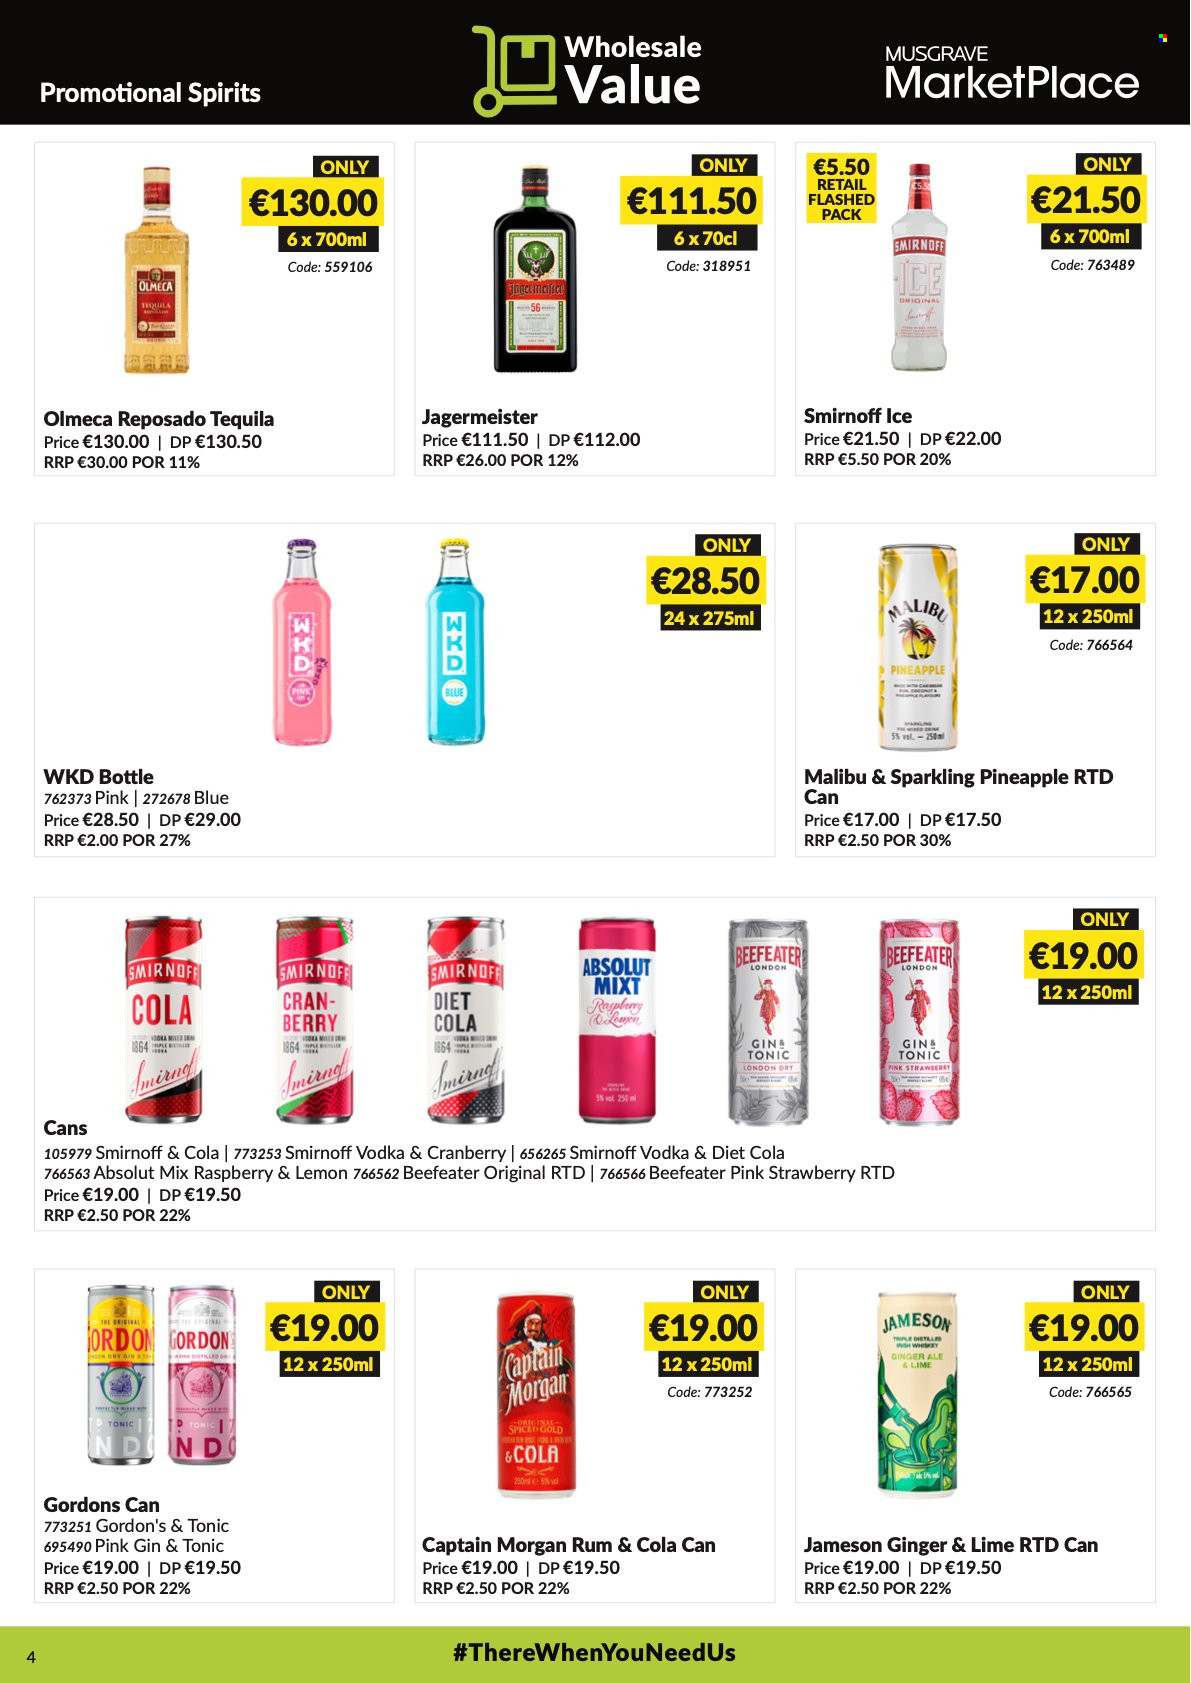 thumbnail - MUSGRAVE Market Place offer  - 26.09.2021 - 23.10.2021 - Sales products - pineapple, ginger ale, Captain Morgan, rum, Smirnoff, tequila, vodka, Jameson, Gordon's, Absolut, Beefeater, Jägermeister, Malibu, Olmeca, gin & tonic. Page 4.